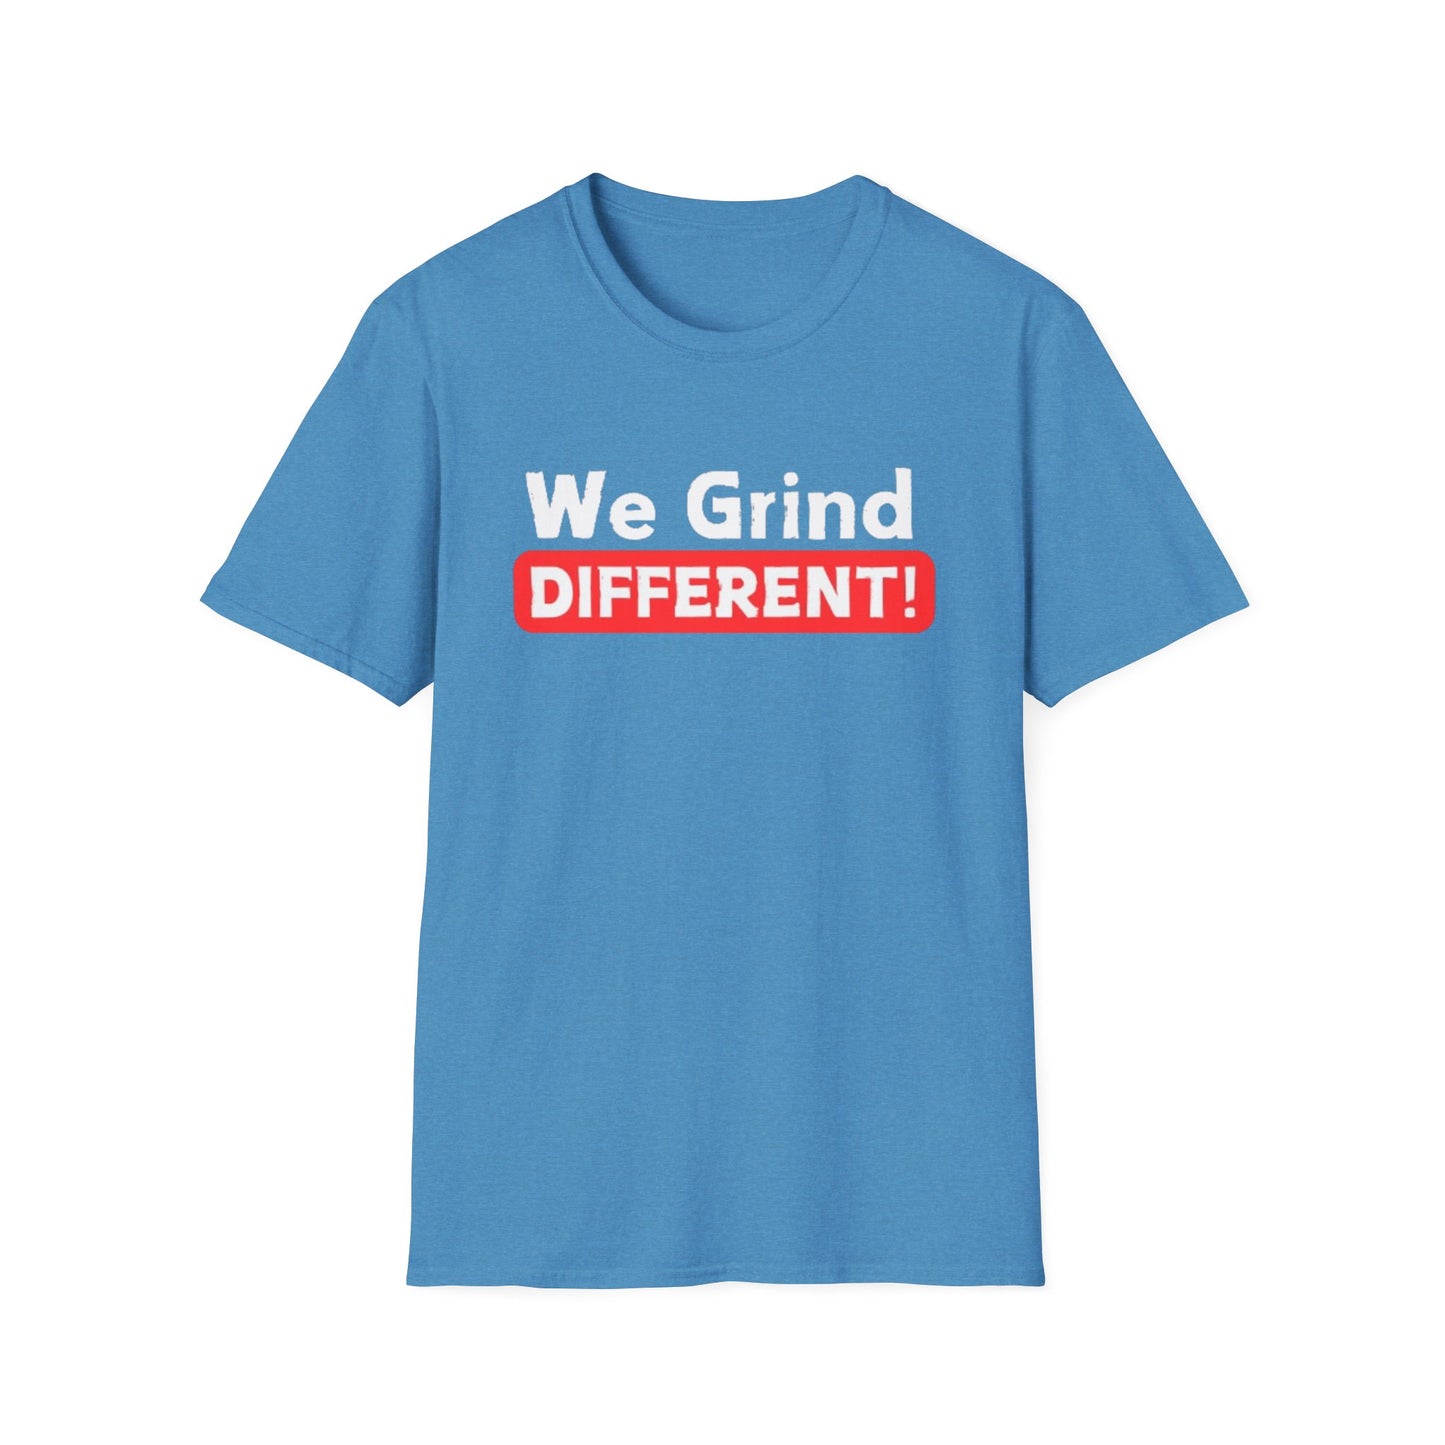 We Grind DIFFERENT Unisex Softstyle T-Shirt